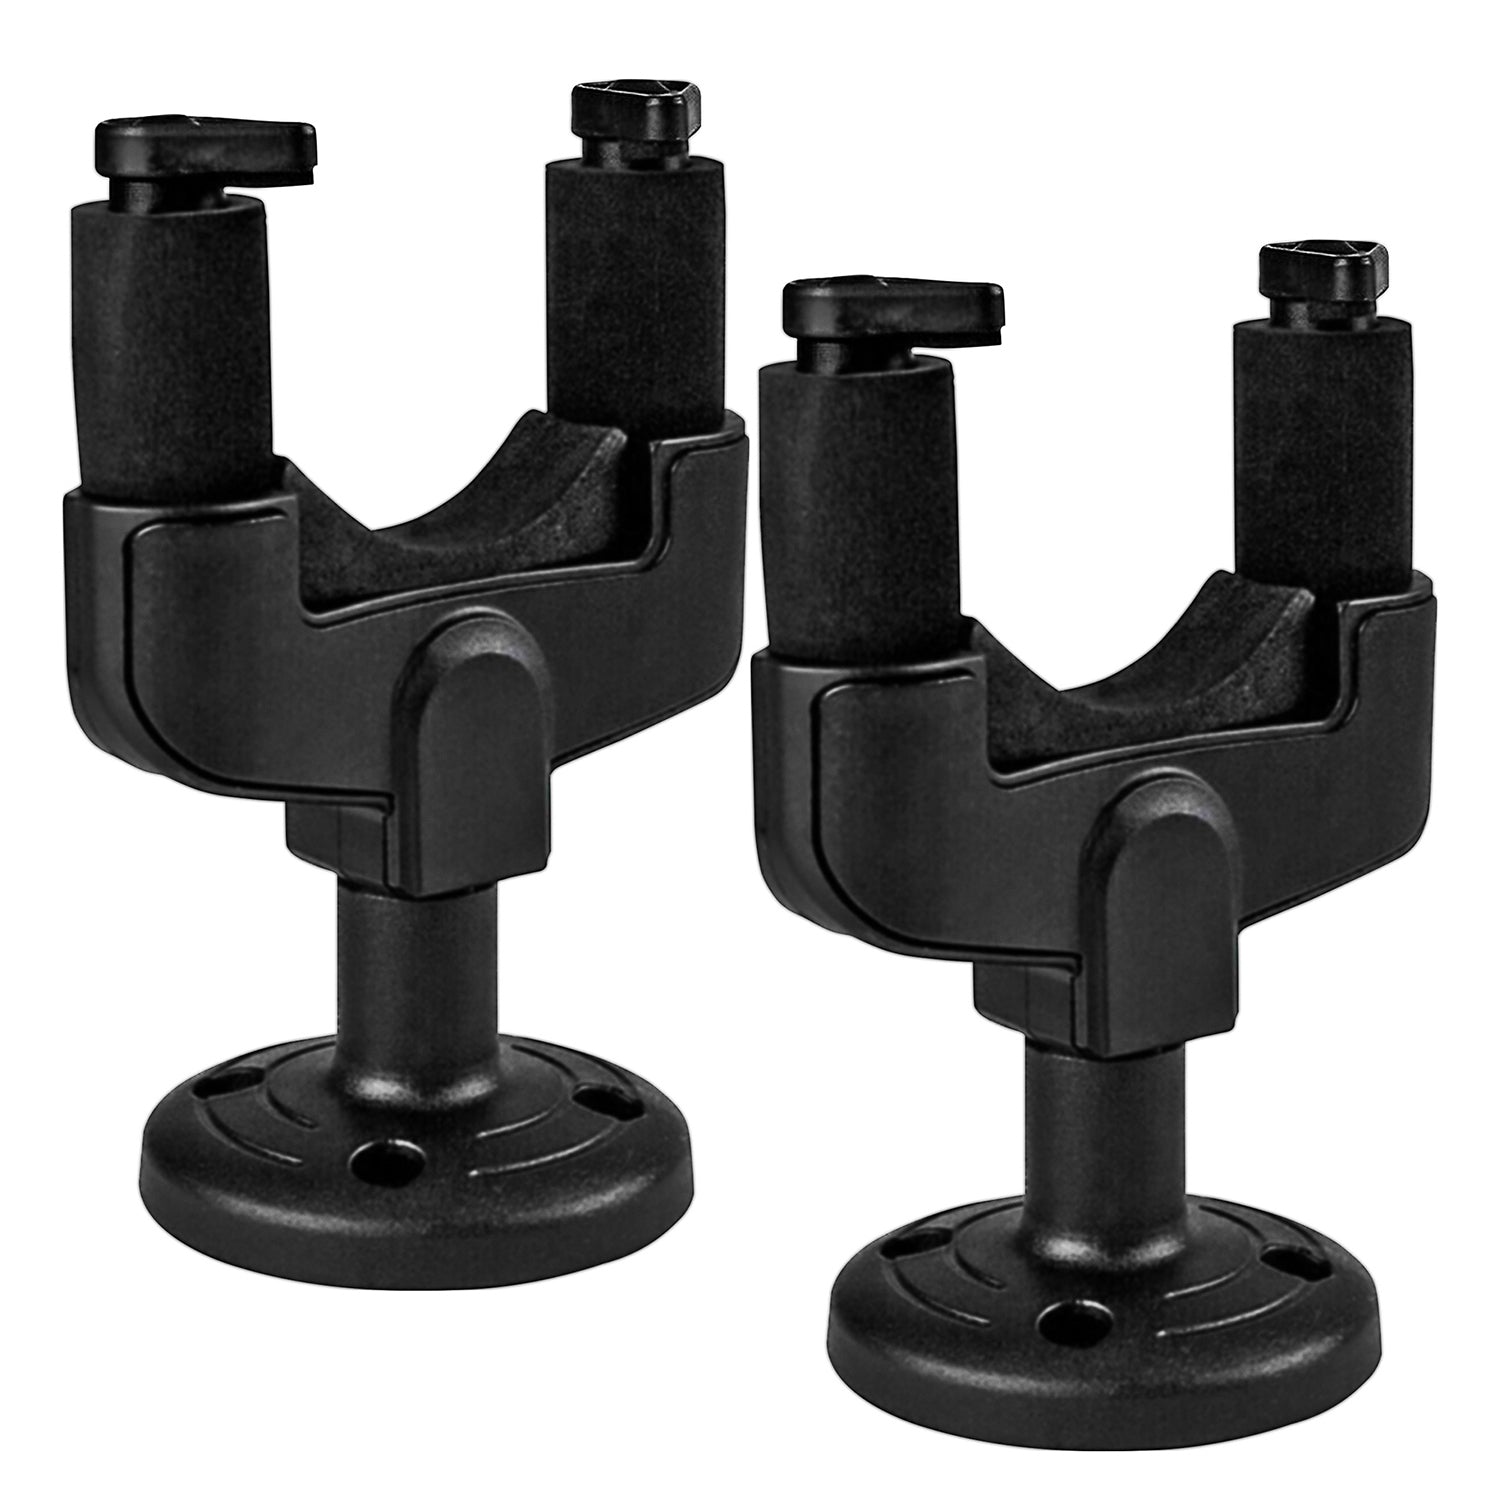 5 Core Guitar Wall Mount Black 2 Pieces Guitar Wall Hangers Easy Lock and Adjustable Acoustic Bass Ukulele Wall Mount Hook - GH ABS 2pcs